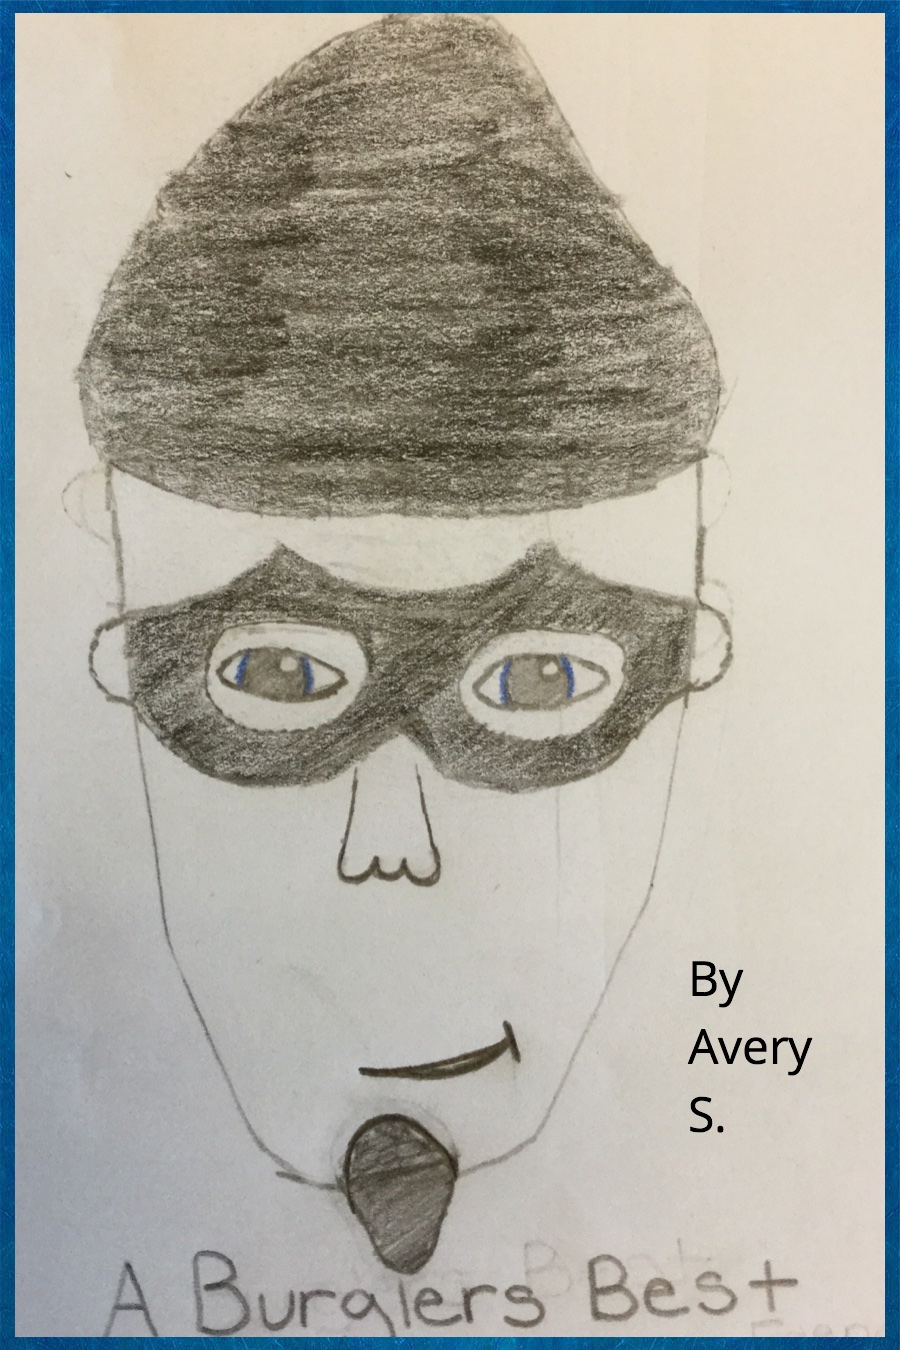 A Burglers Best by Avery S